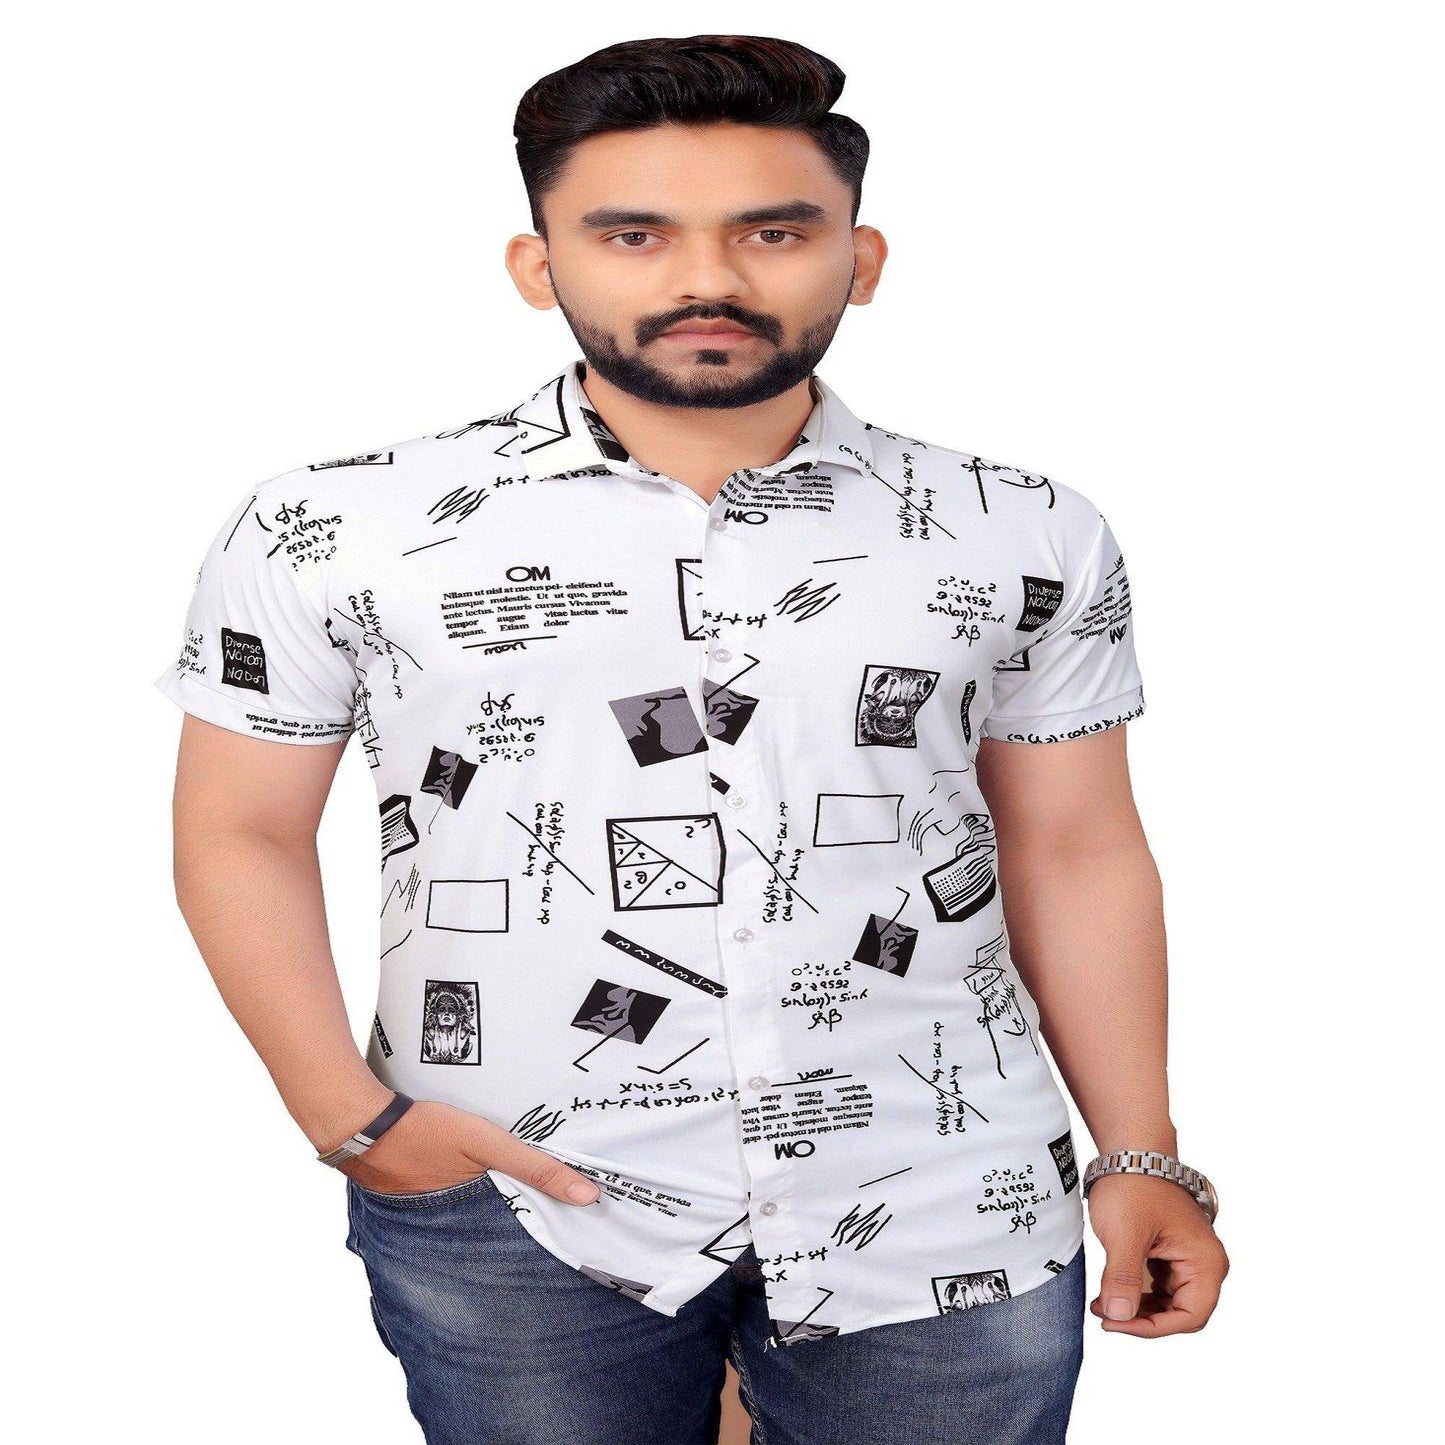 Ud Fabric Stylish Short Sleeve Shirt for Men - Black - UD FABRIC - Your Style our Design